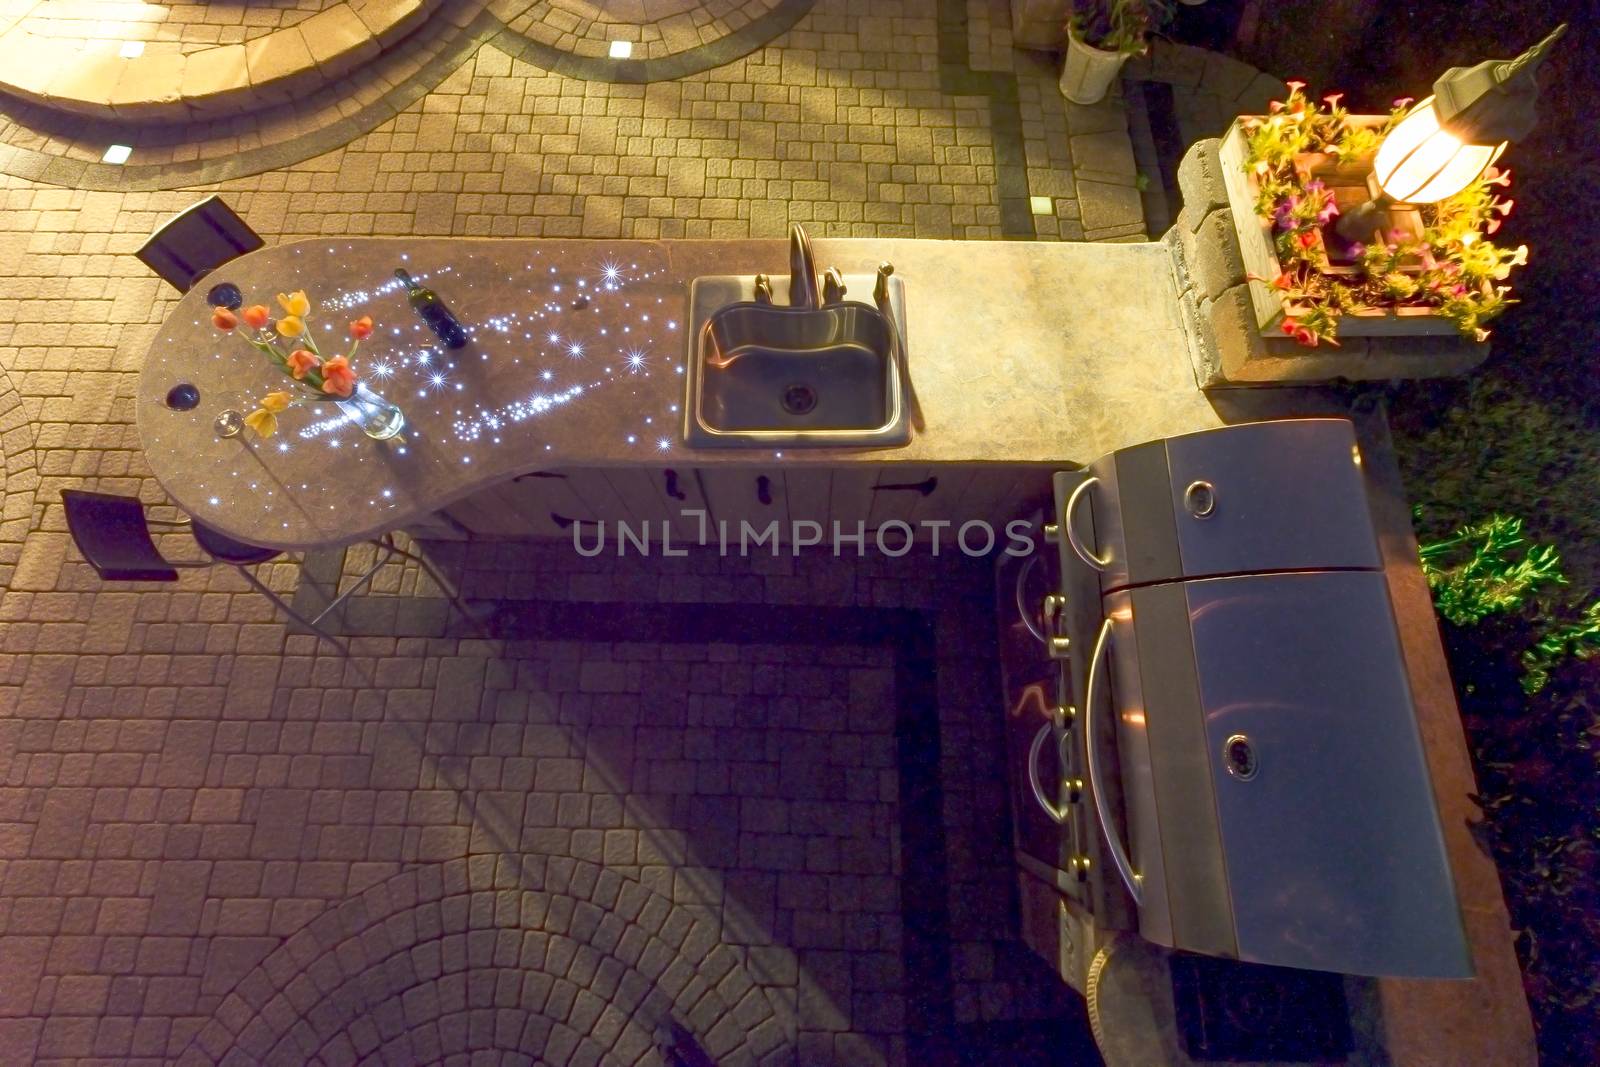 Night Shot of Outdoor Summer Kitchen with Fiberoptic Lights by coskun